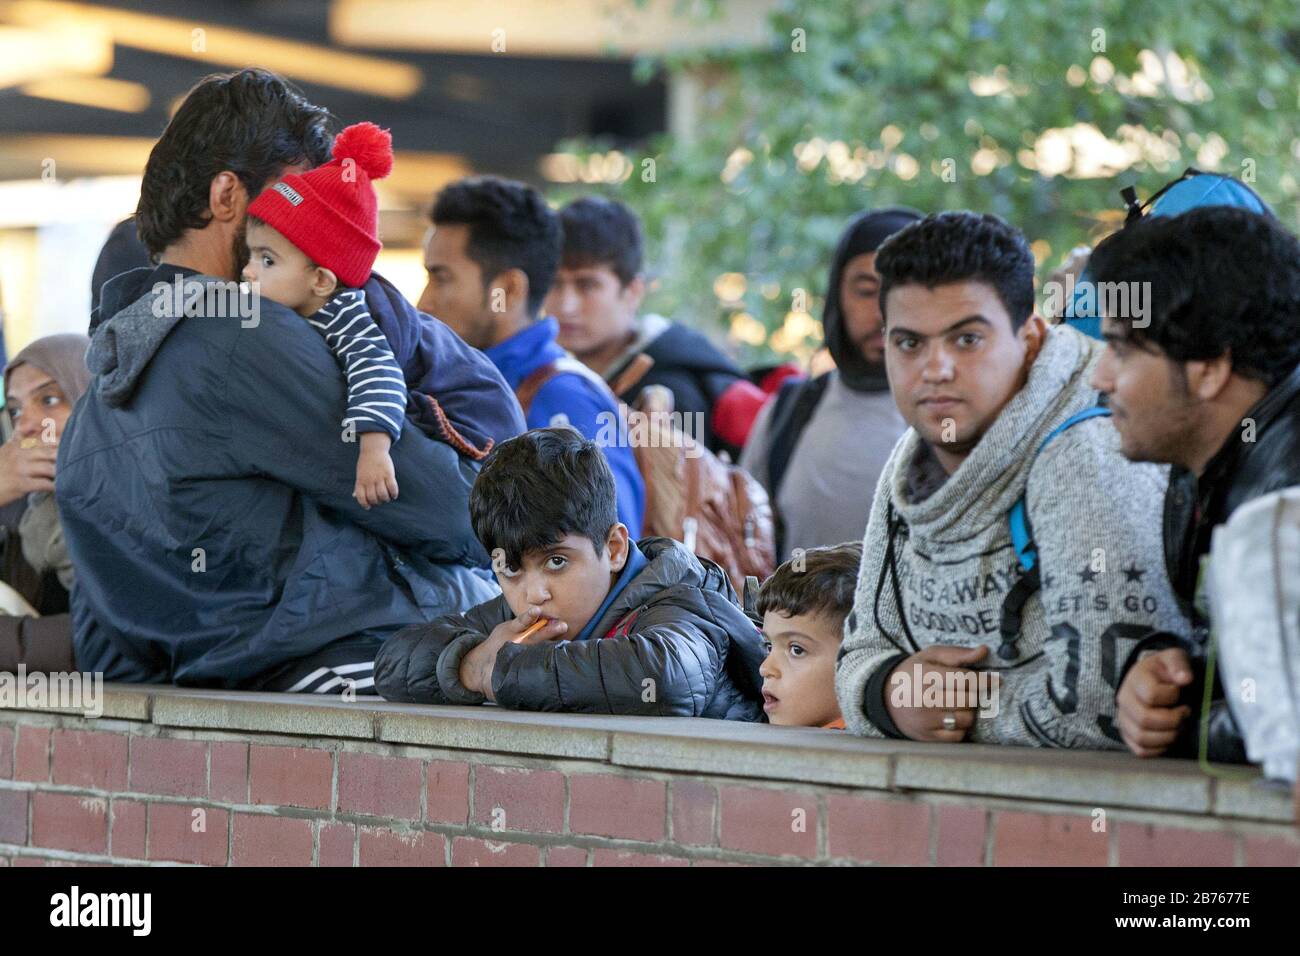 Refugees arrived at Schoenefeld station on 01.10.2015 by a special train. They will then be taken by bus to accommodation in Berlin. [automated translation] Stock Photo